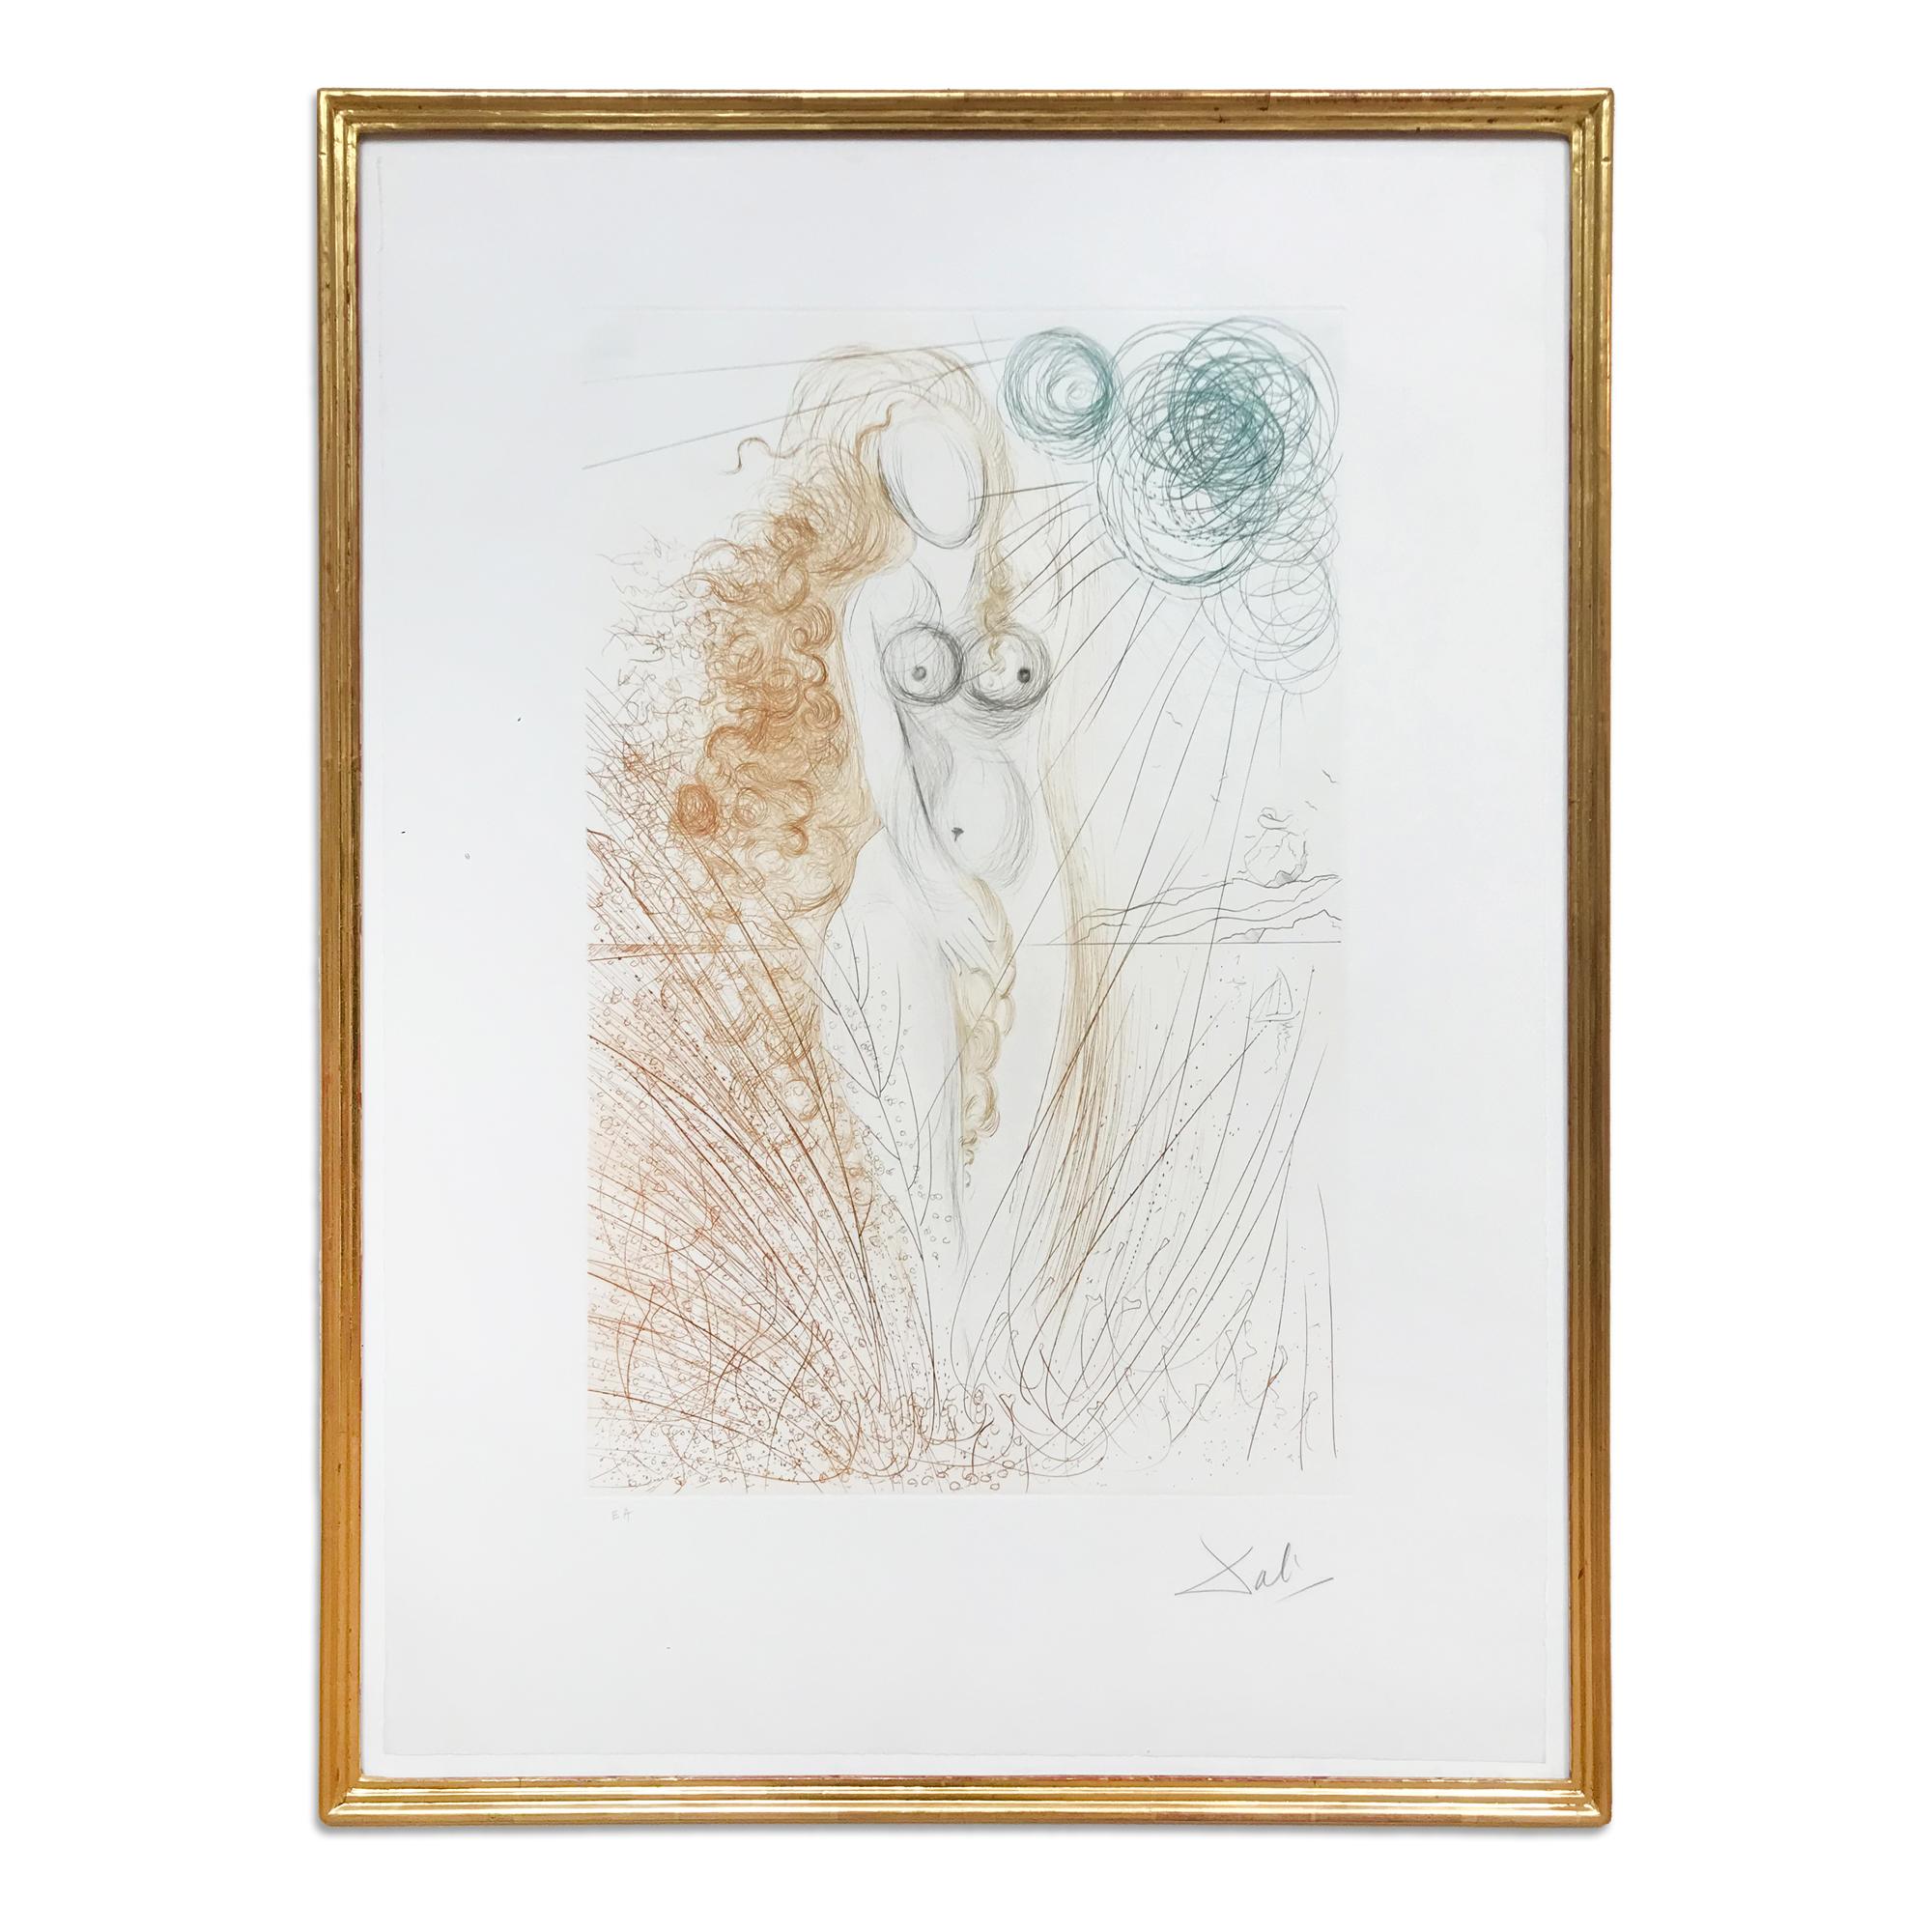 Salvador Dalí Figurative Print – The Birth of Venus, Hand Signed Etching, Surrealism, Modern Art, 20th Century